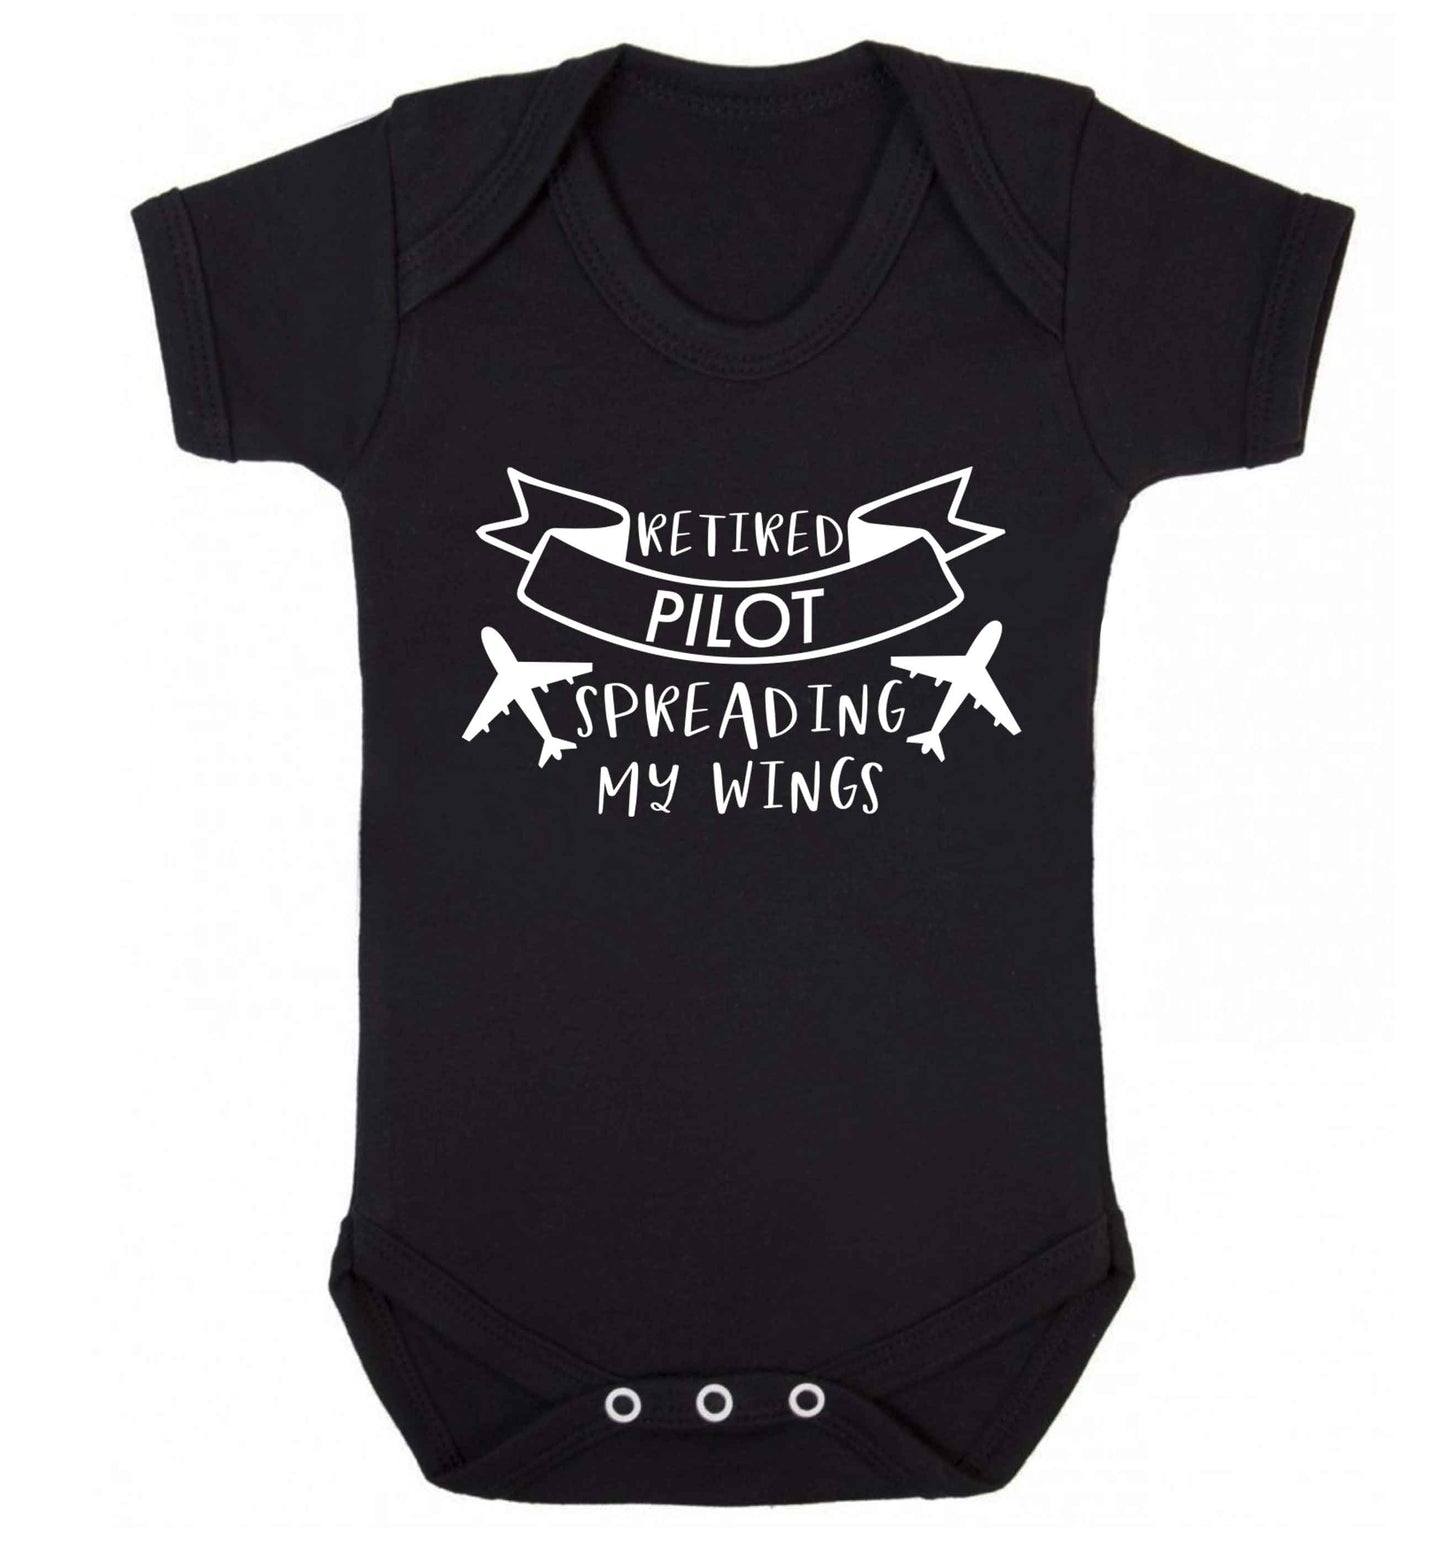 Retired pilot spreading my wings Baby Vest black 18-24 months